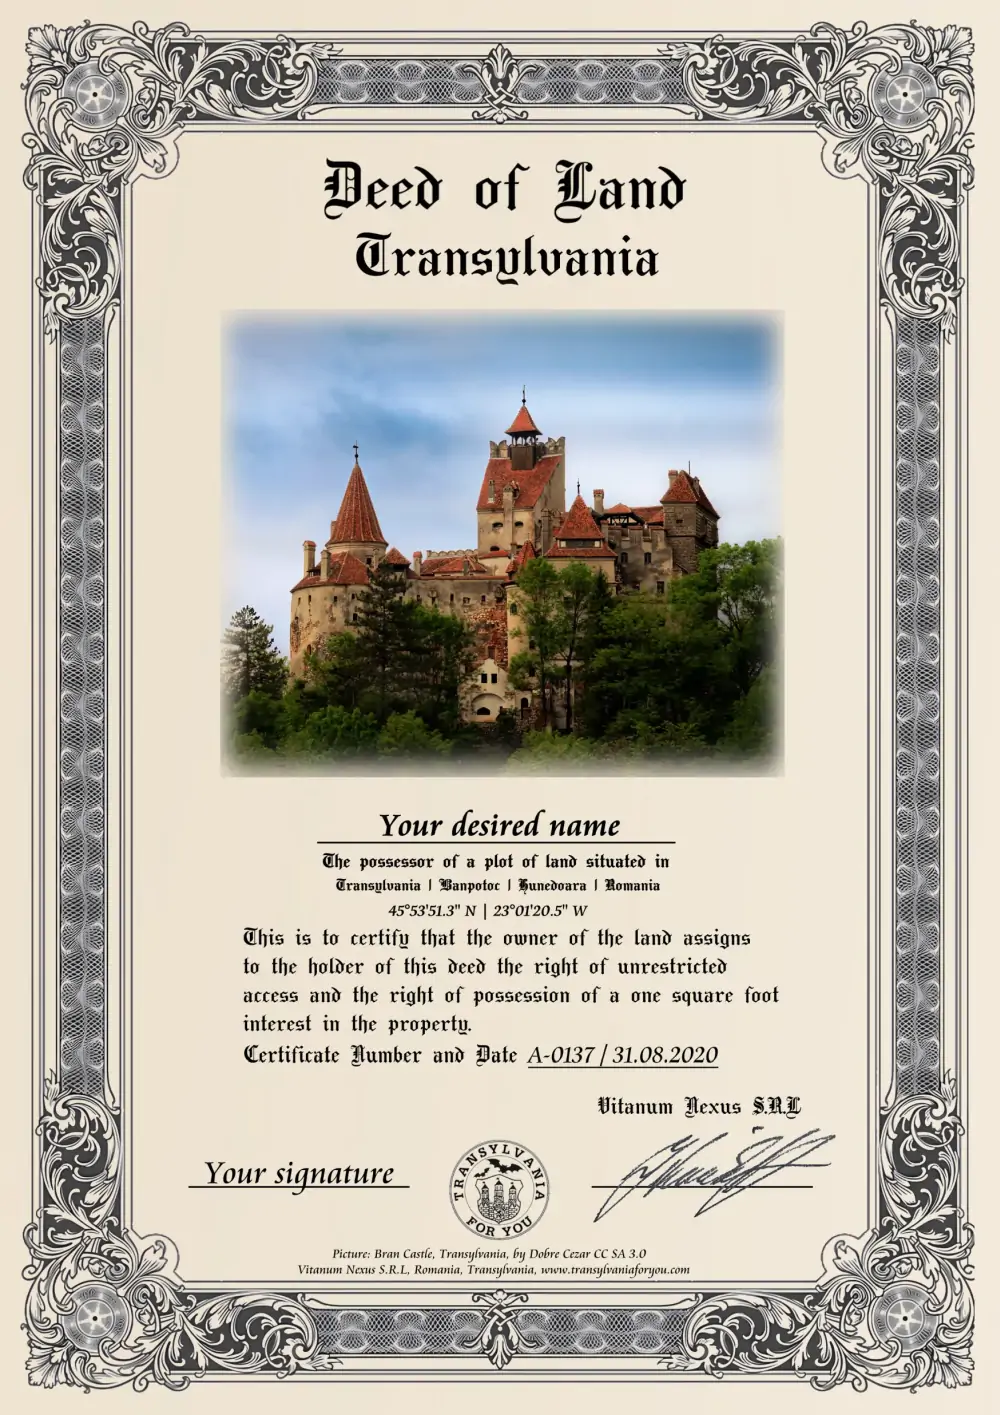 Image on the deed: Bran Castle